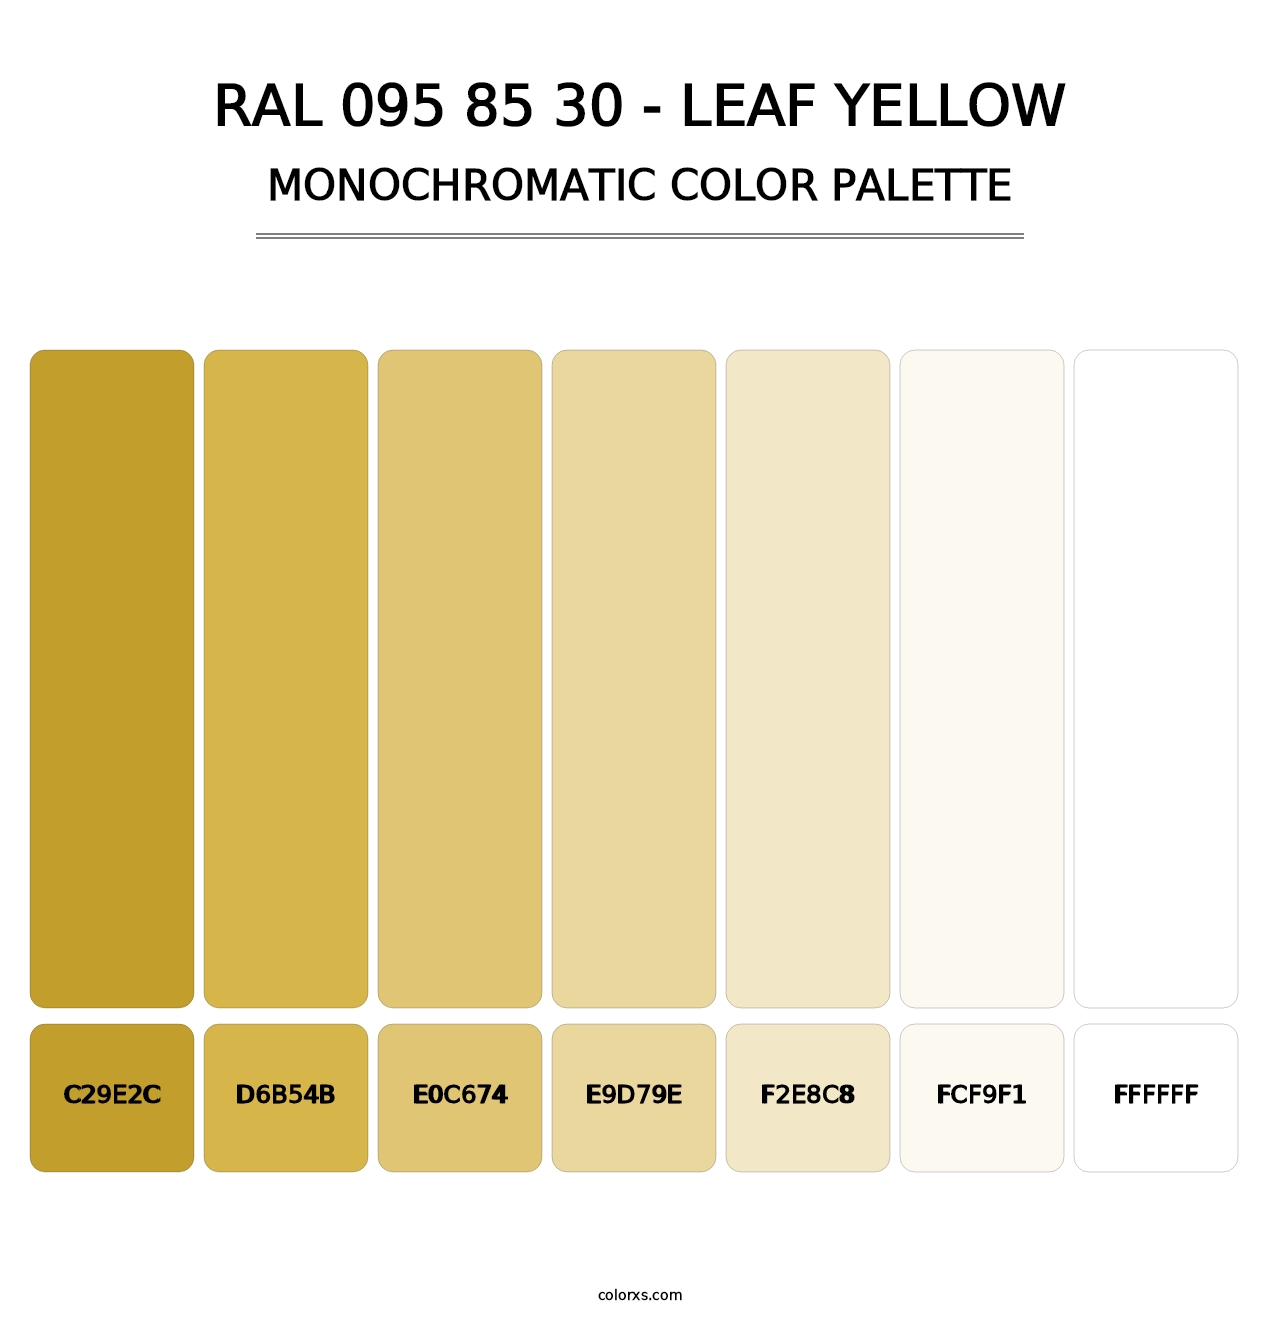 RAL 095 85 30 - Leaf Yellow - Monochromatic Color Palette